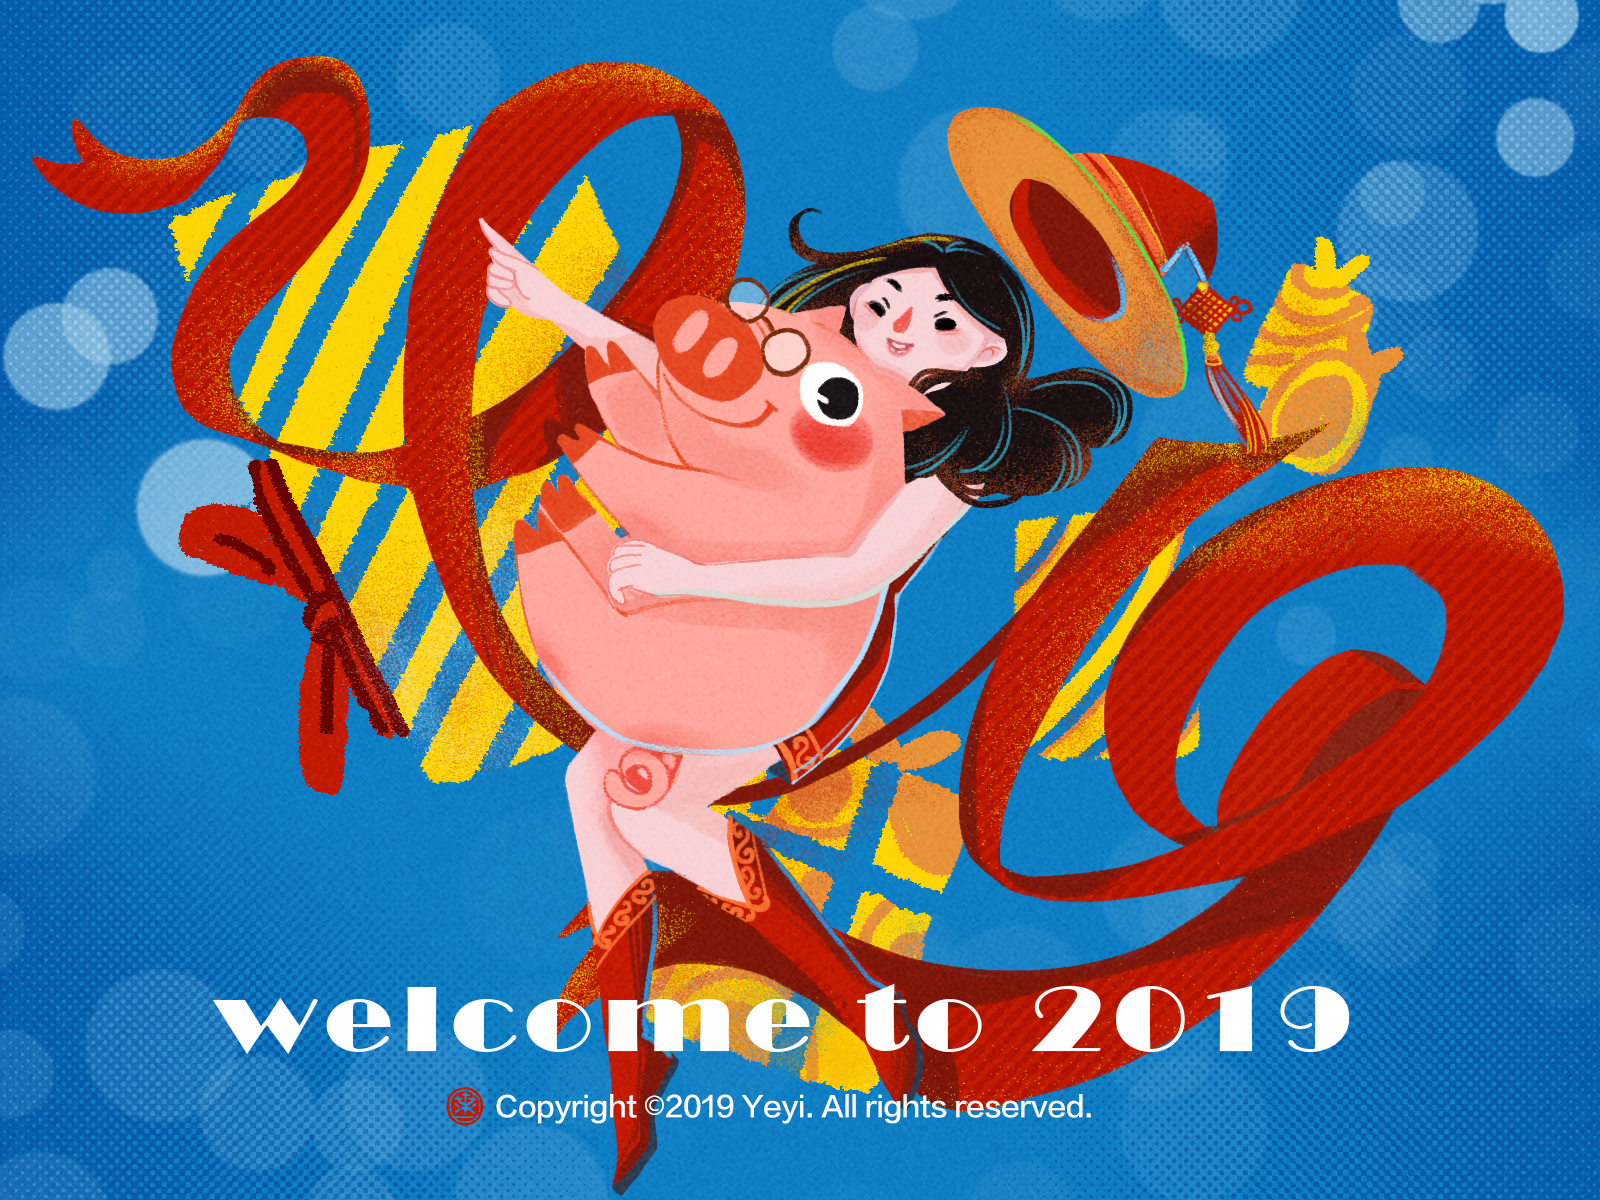 Welcome to 2019 illustration